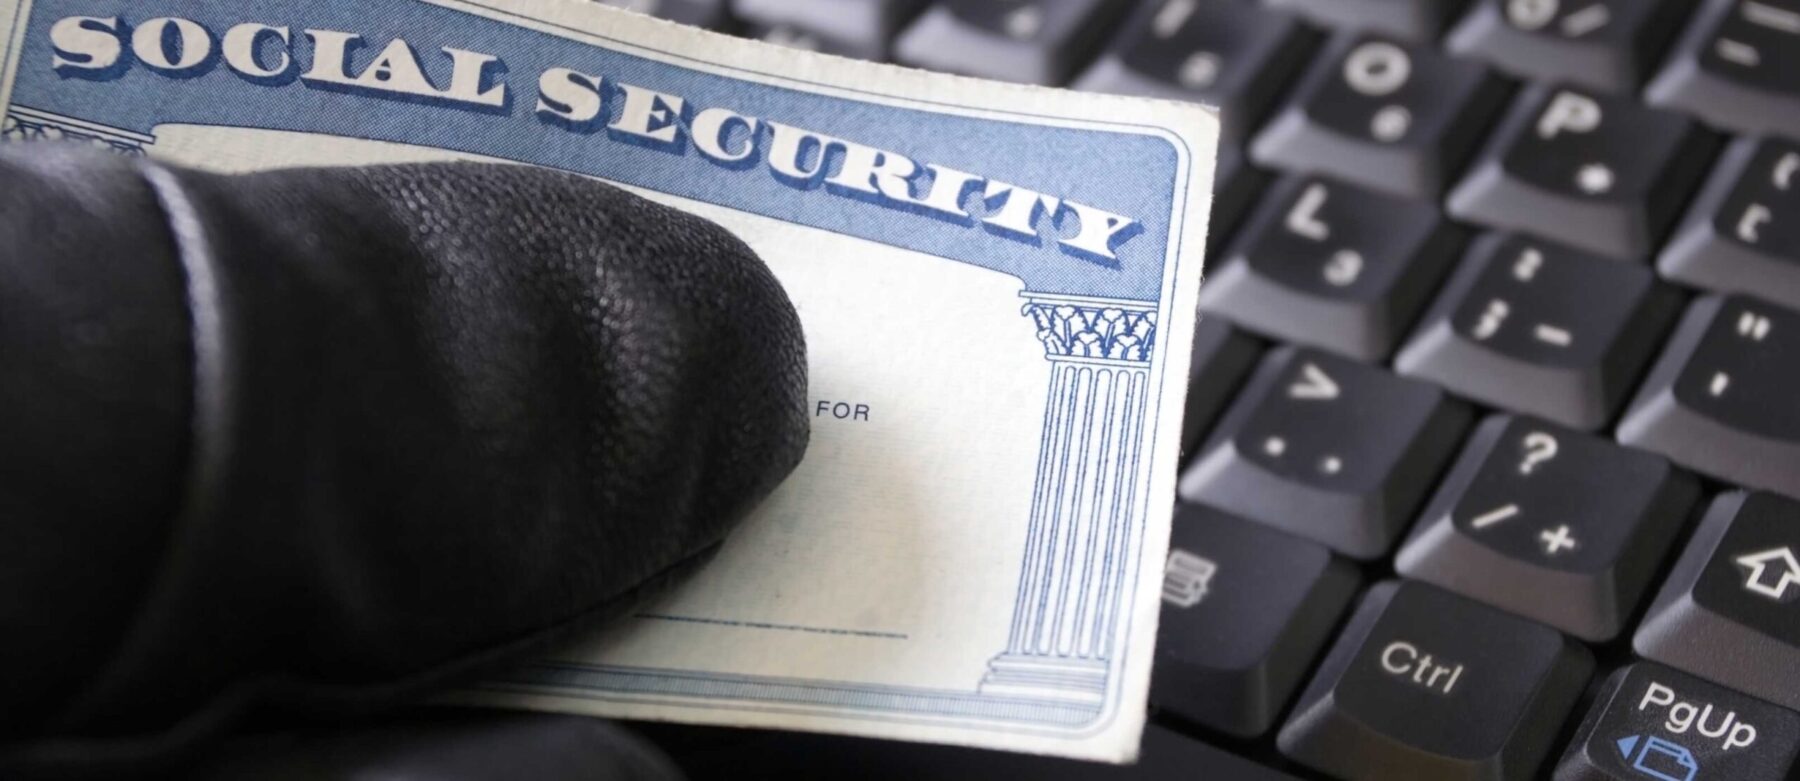 Identity theft and Social Security card